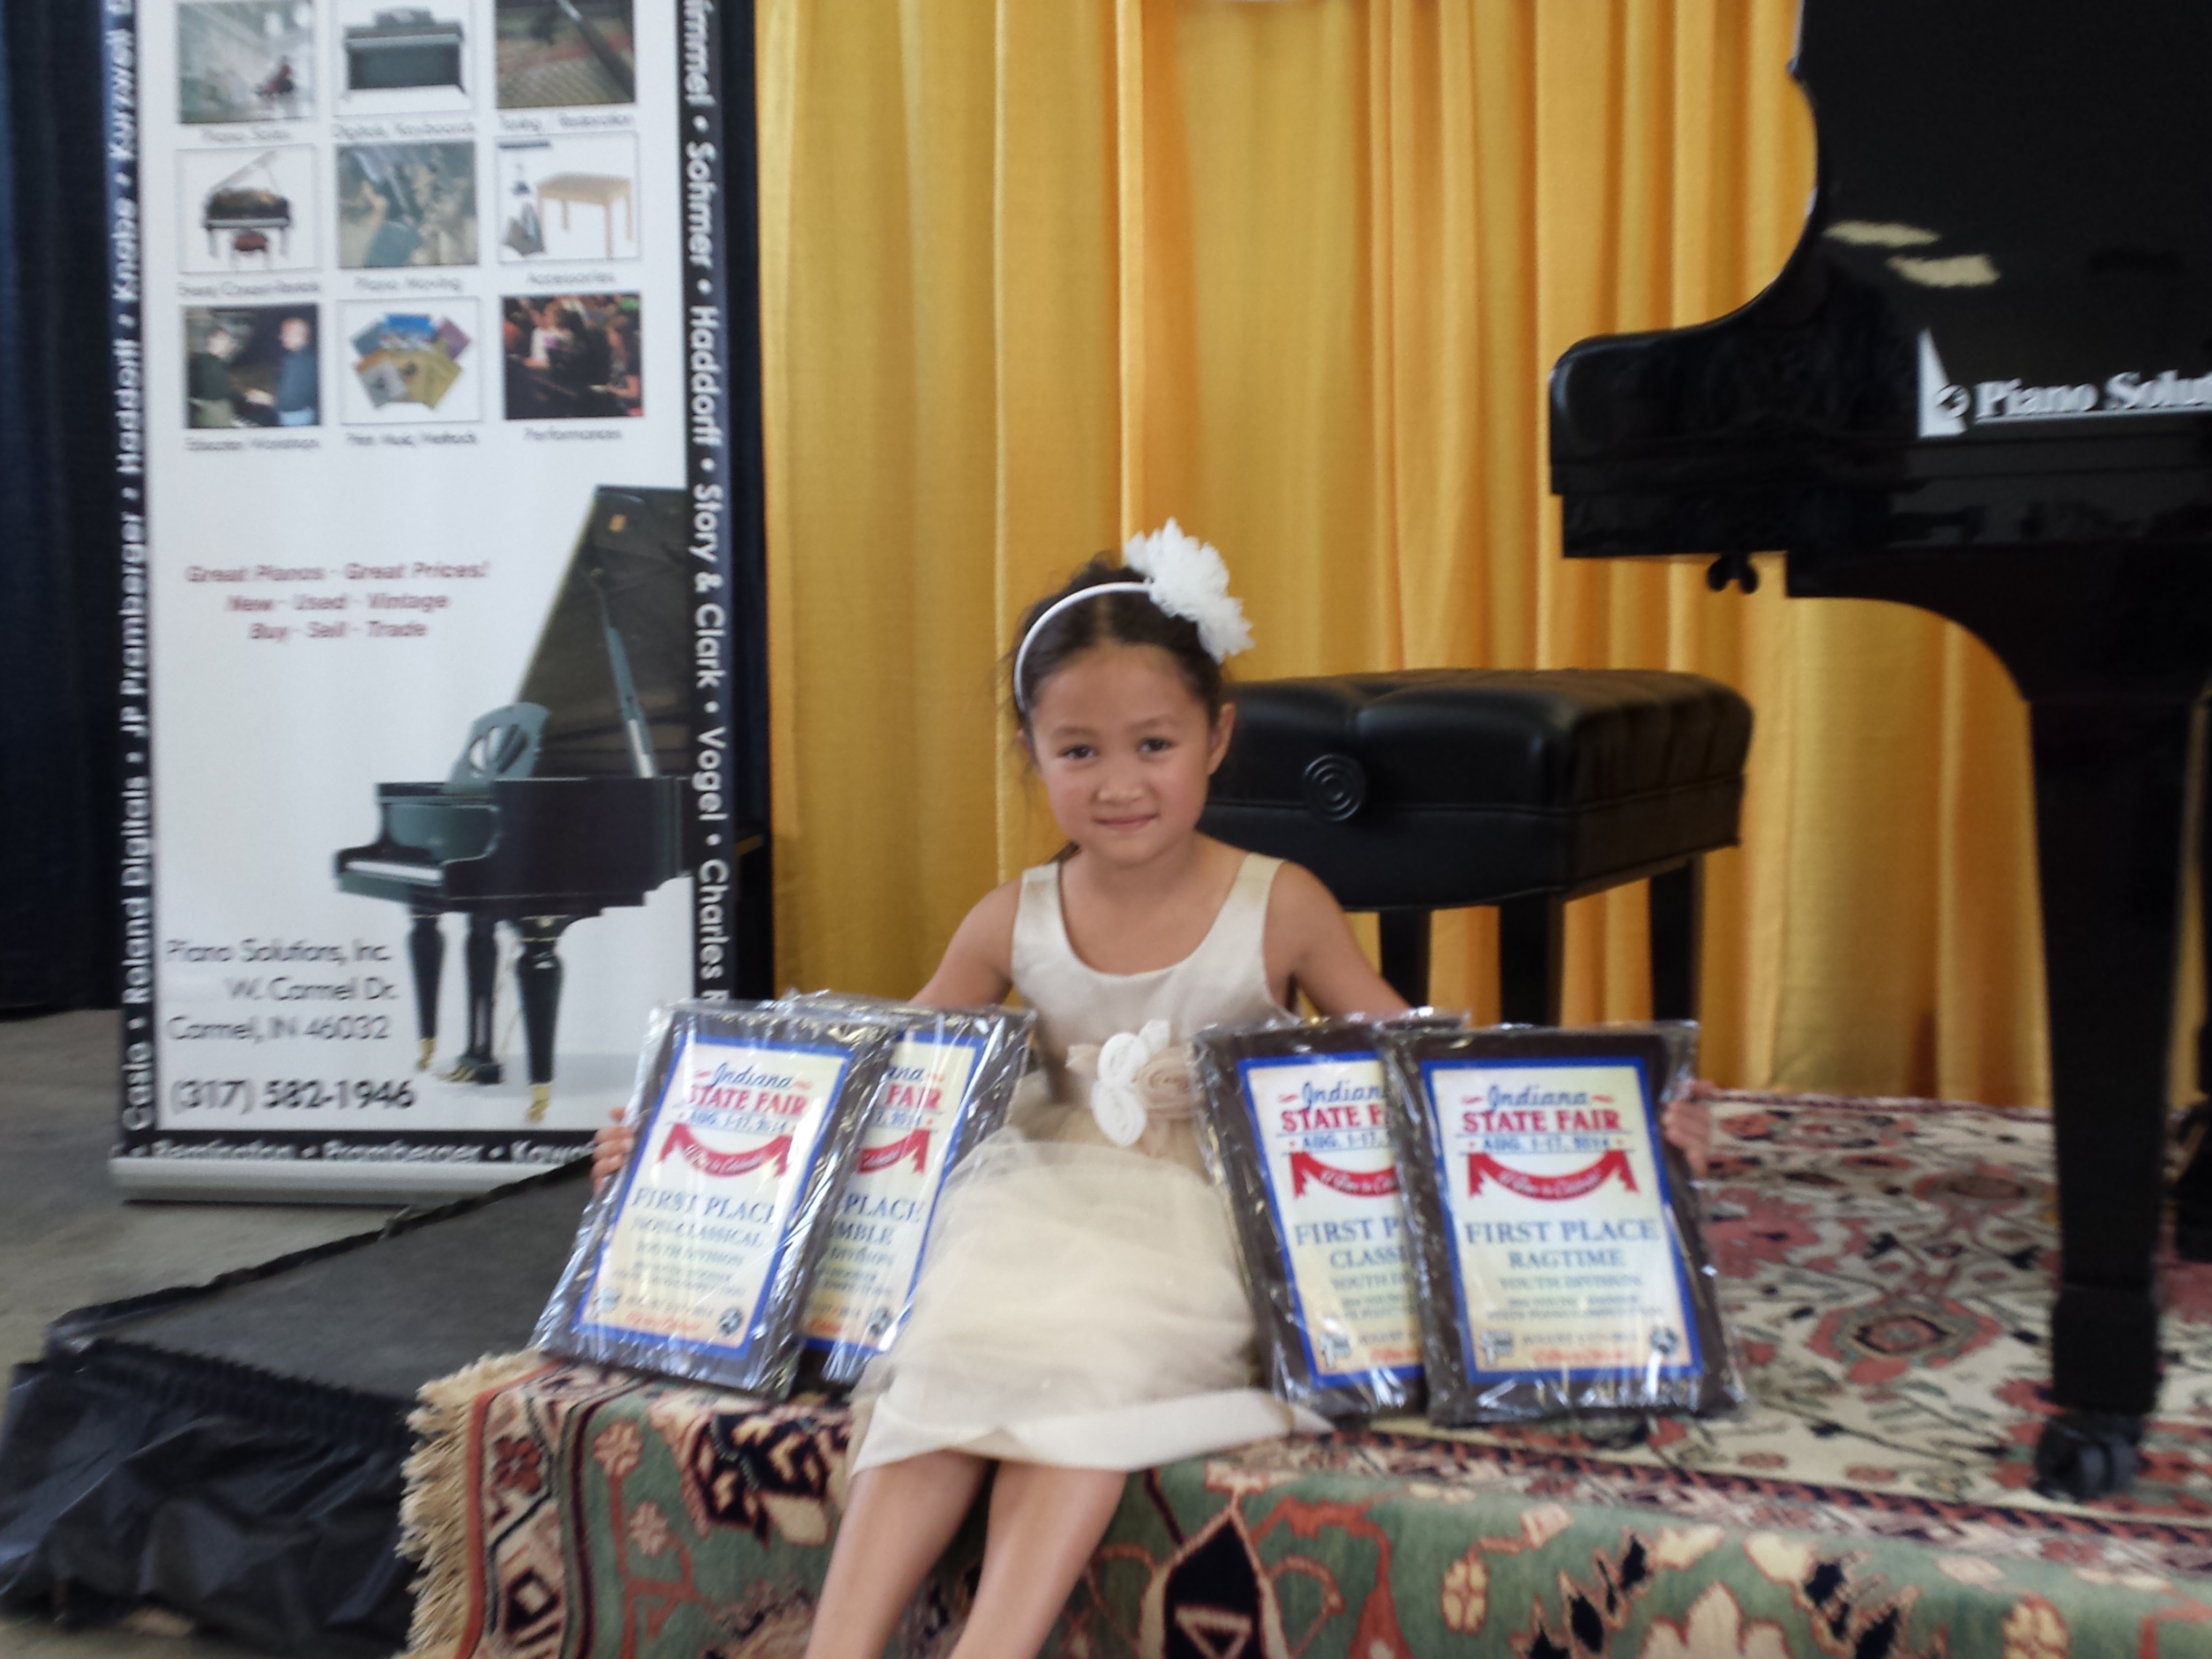 My daughter Jessica 6 of Carmel just placed first in 4 different categories at the 2014 State Fair piano competition. Would it be possible to have this printed I could provide more information if needed.